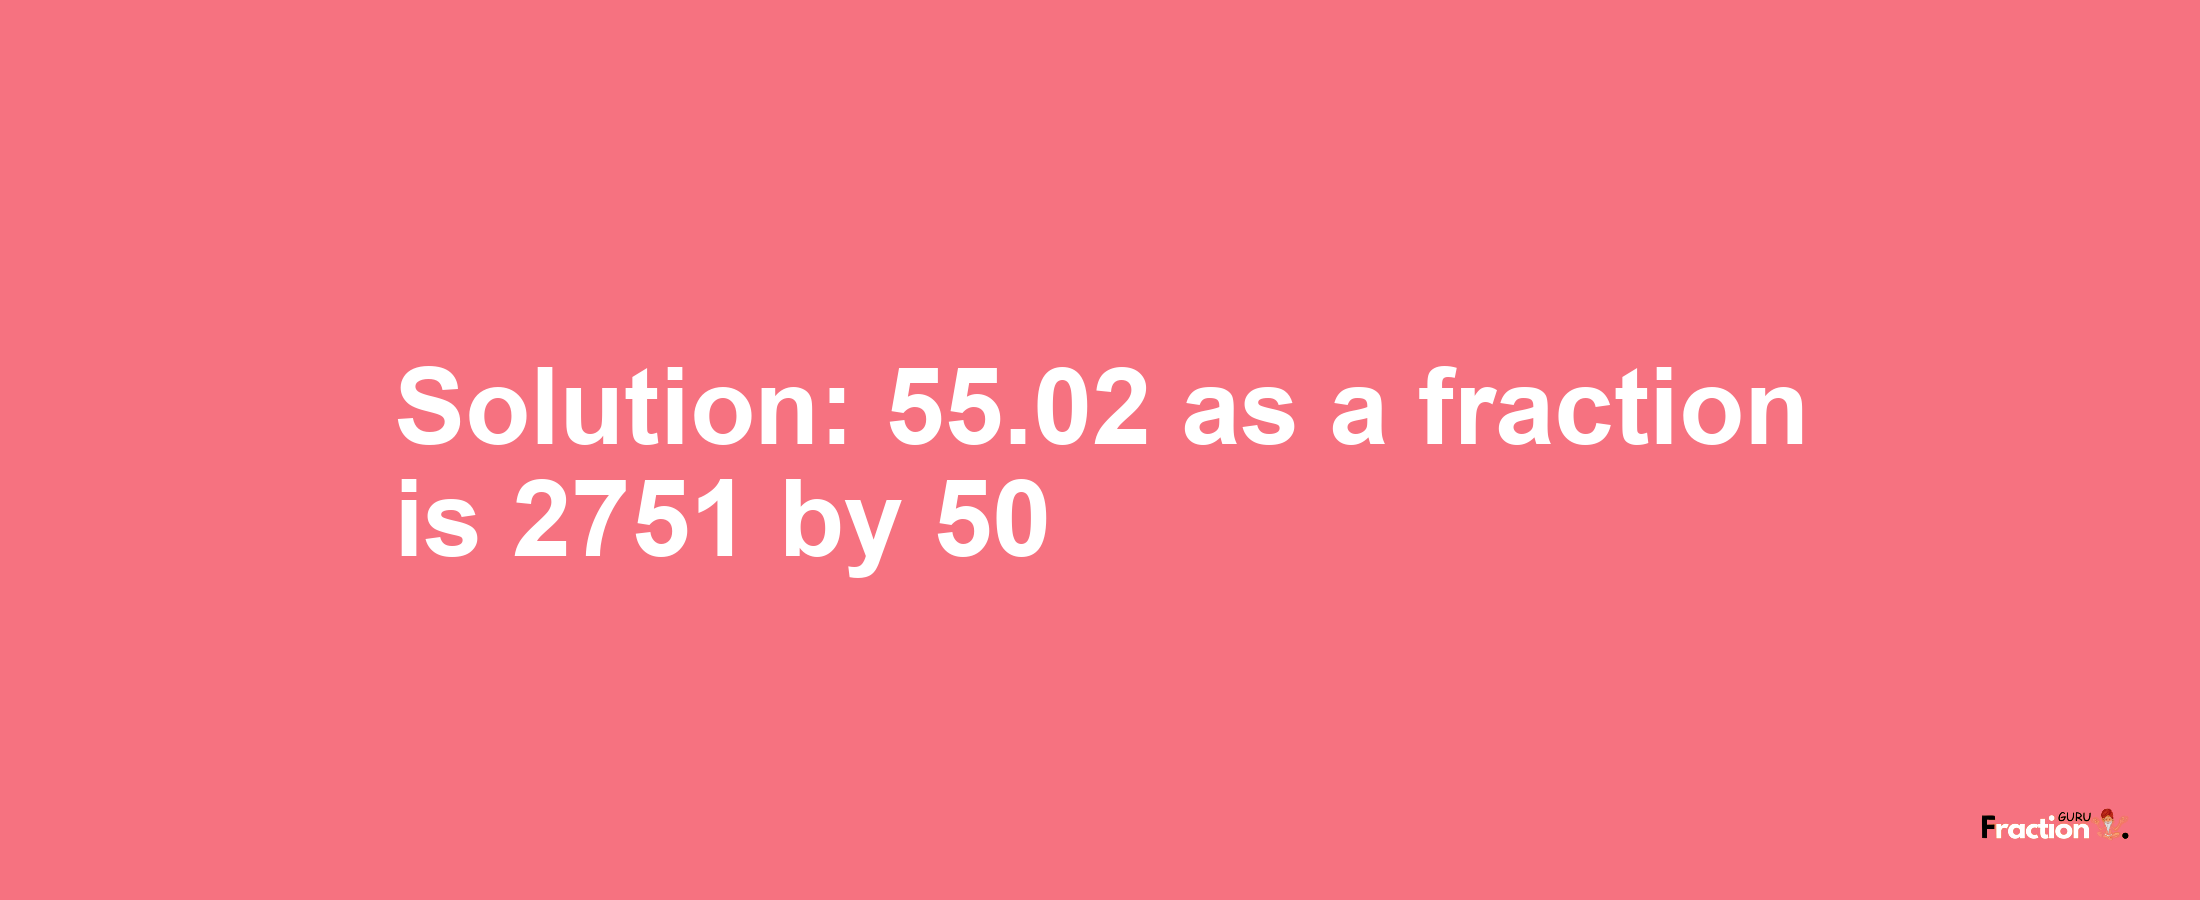 Solution:55.02 as a fraction is 2751/50